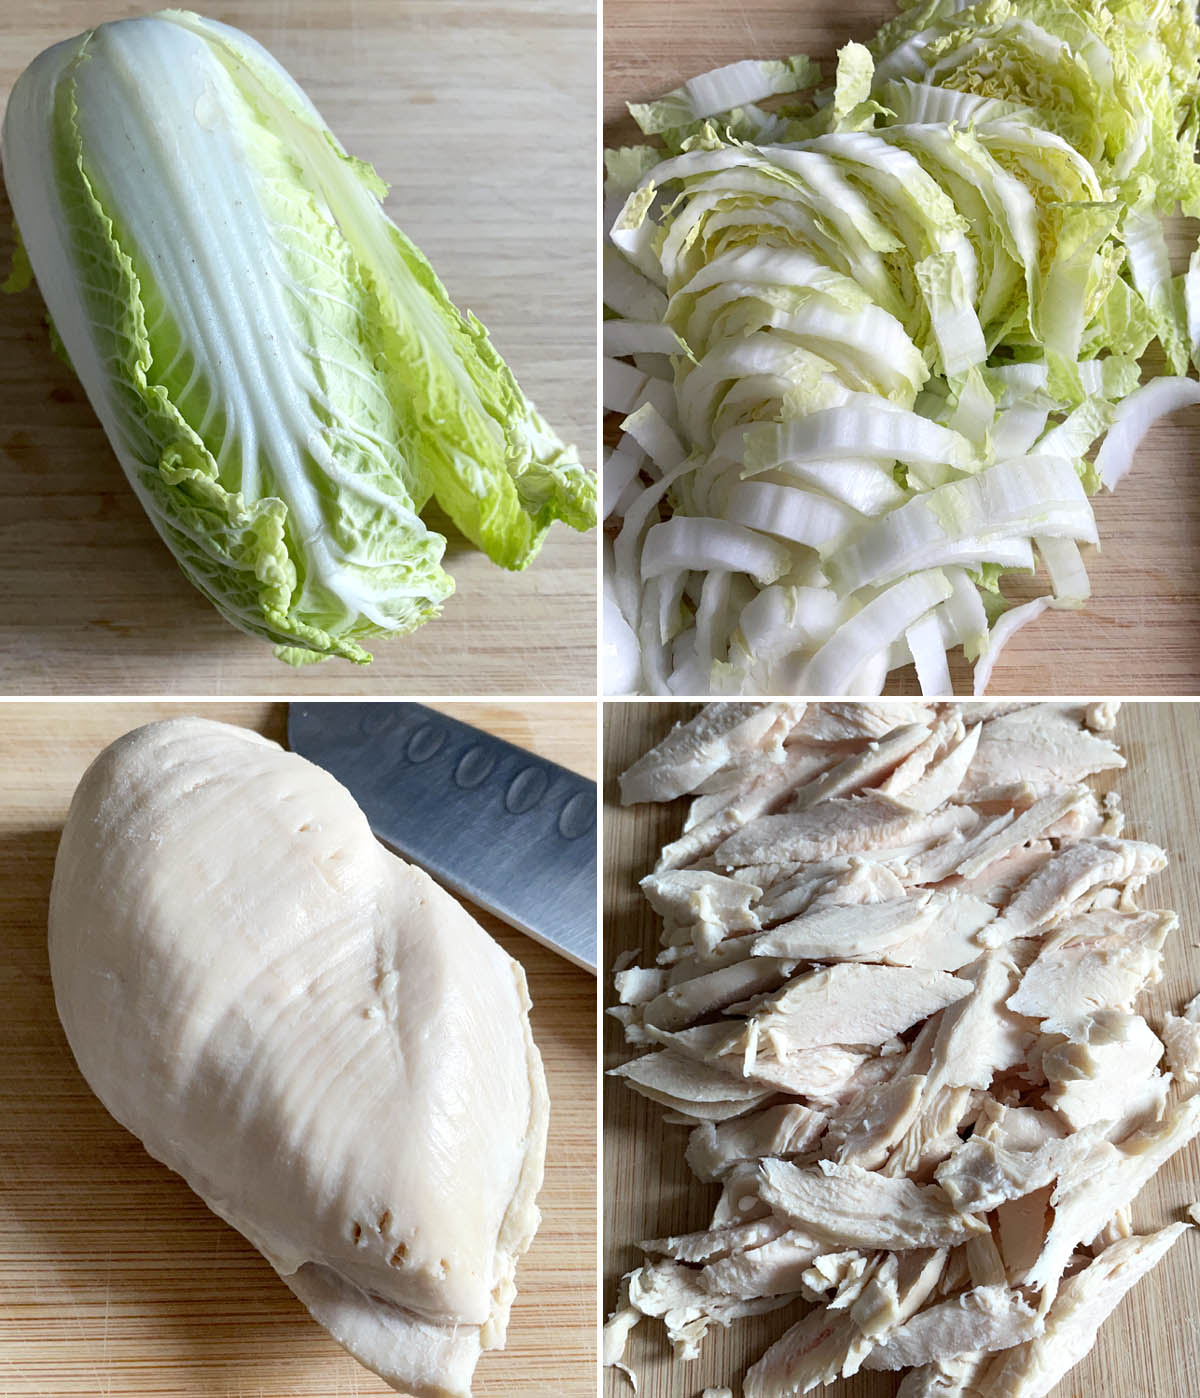 A head of white and green napa cabbage, thinly sliced, and a cooked chicken breast cut into small pieces.